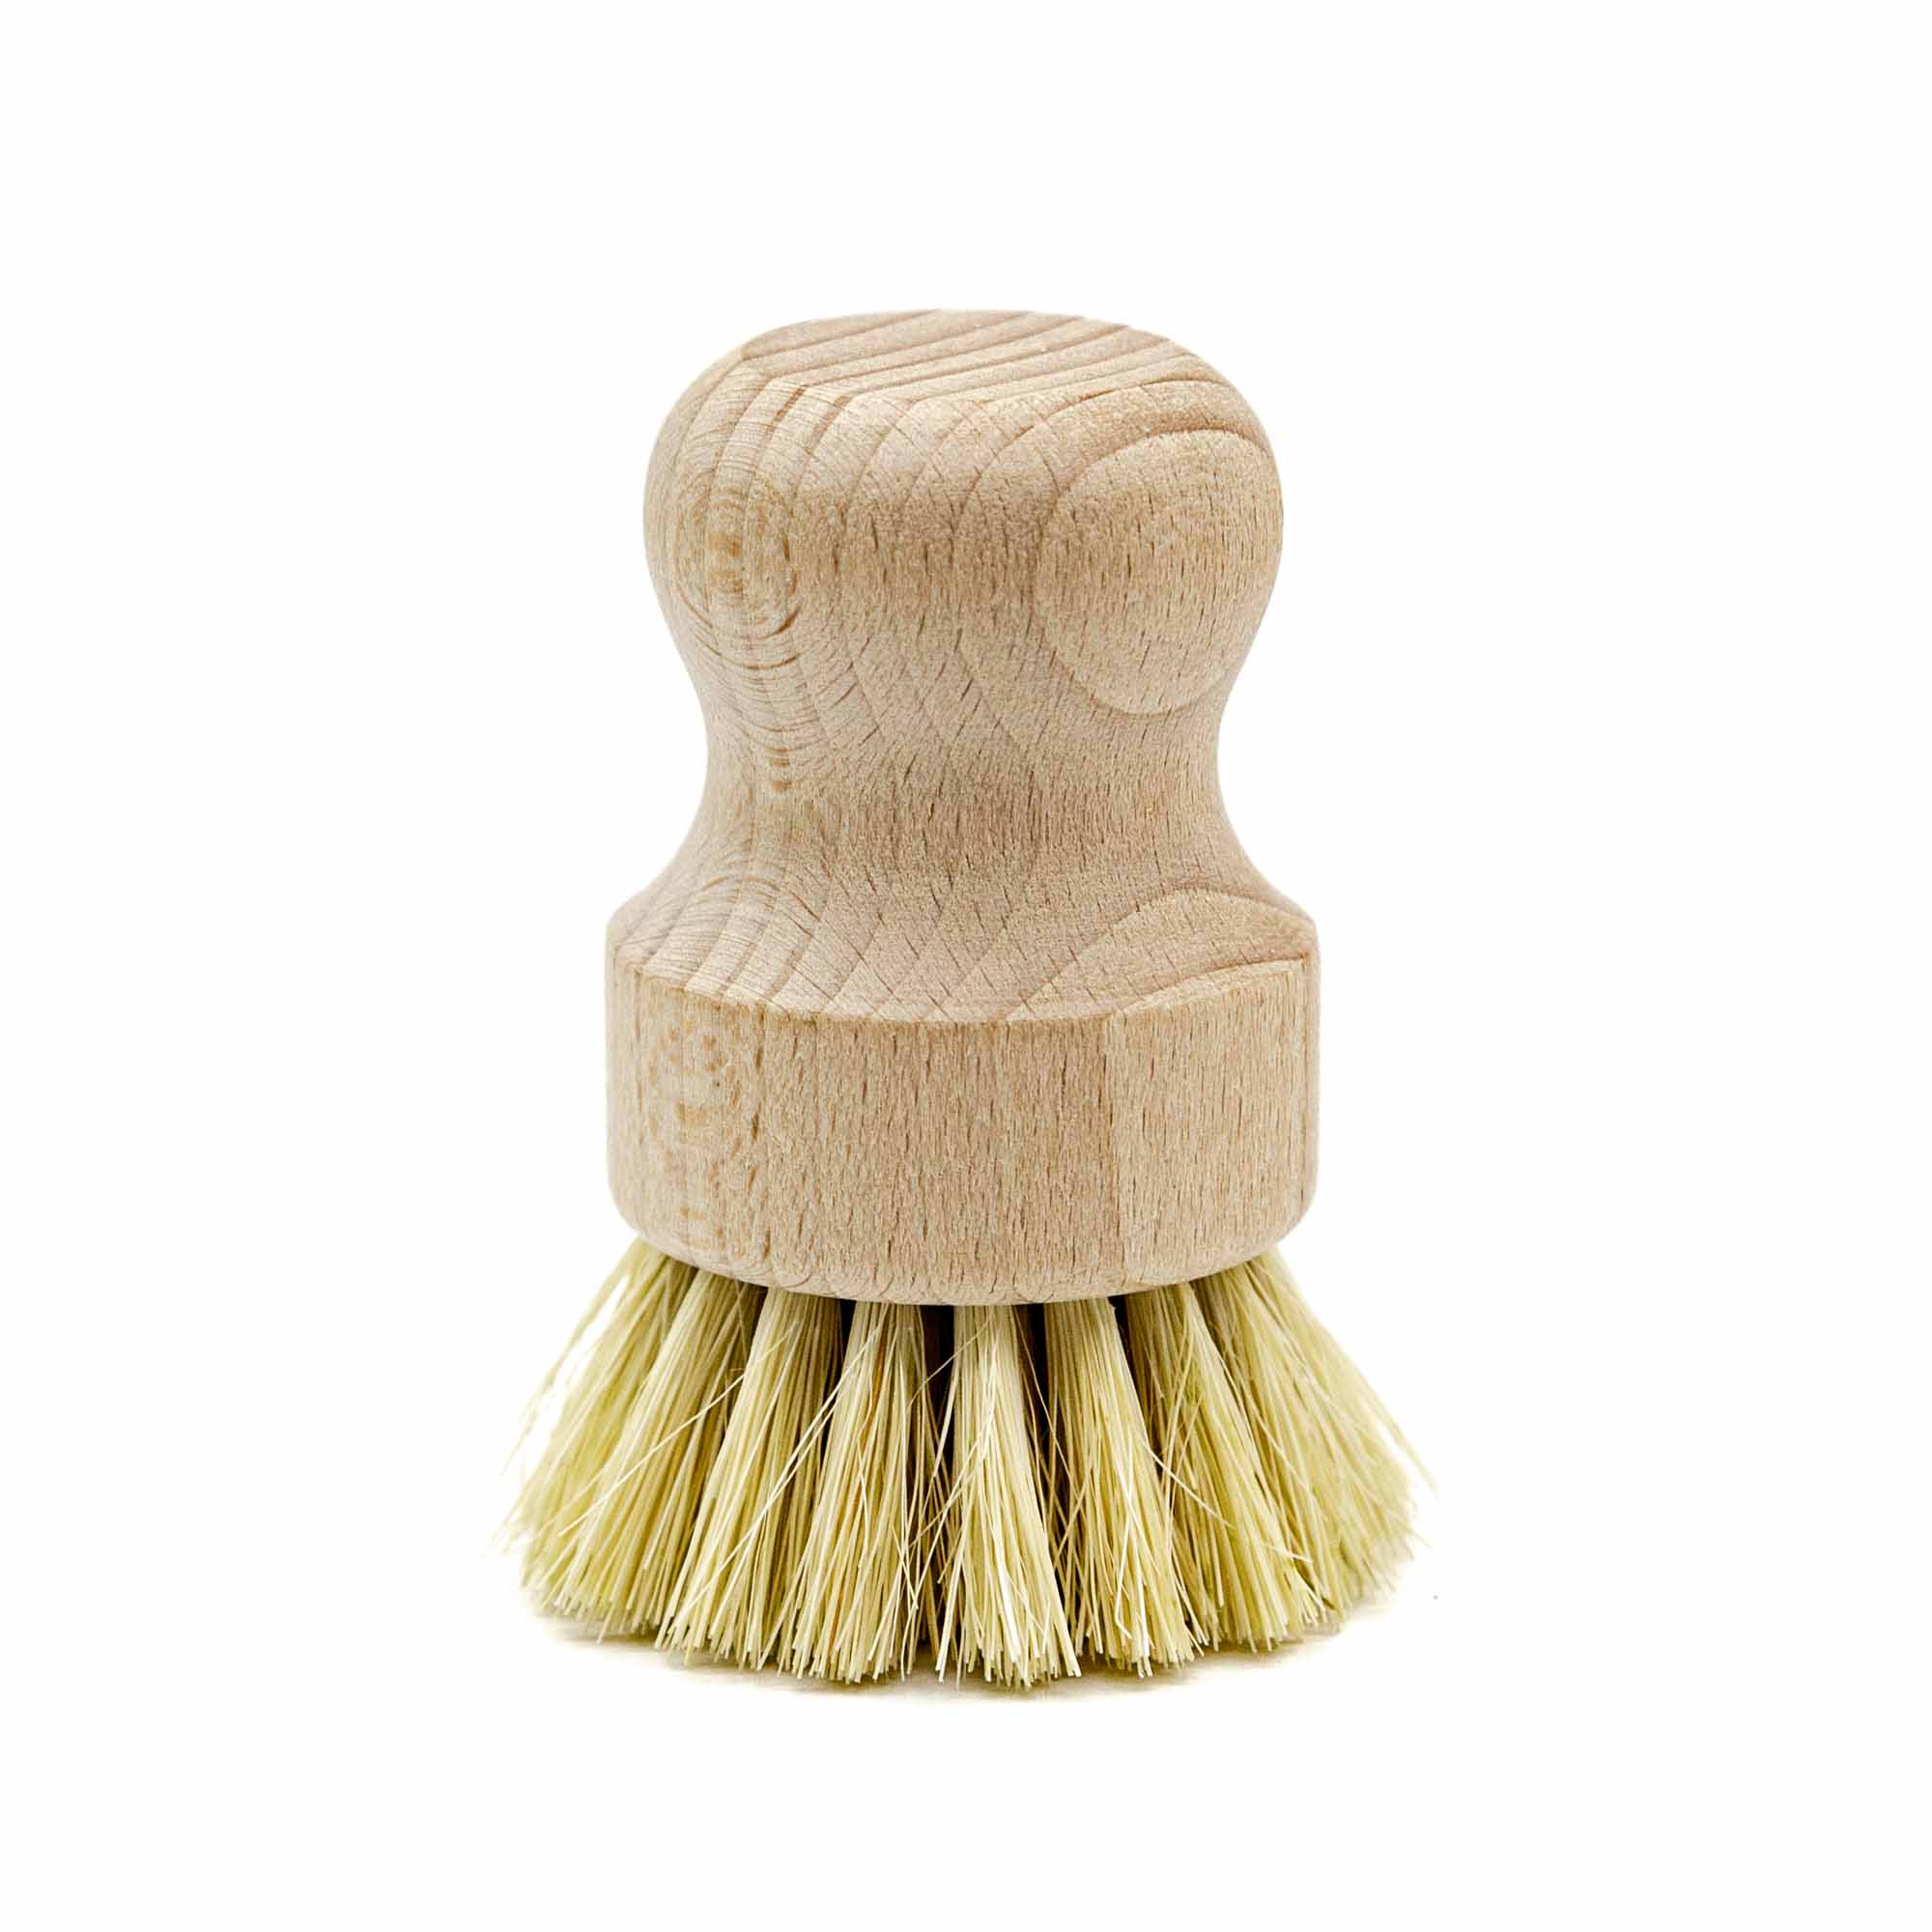 Casa Agave Dish Scrubber Brush - Mortise And Tenon